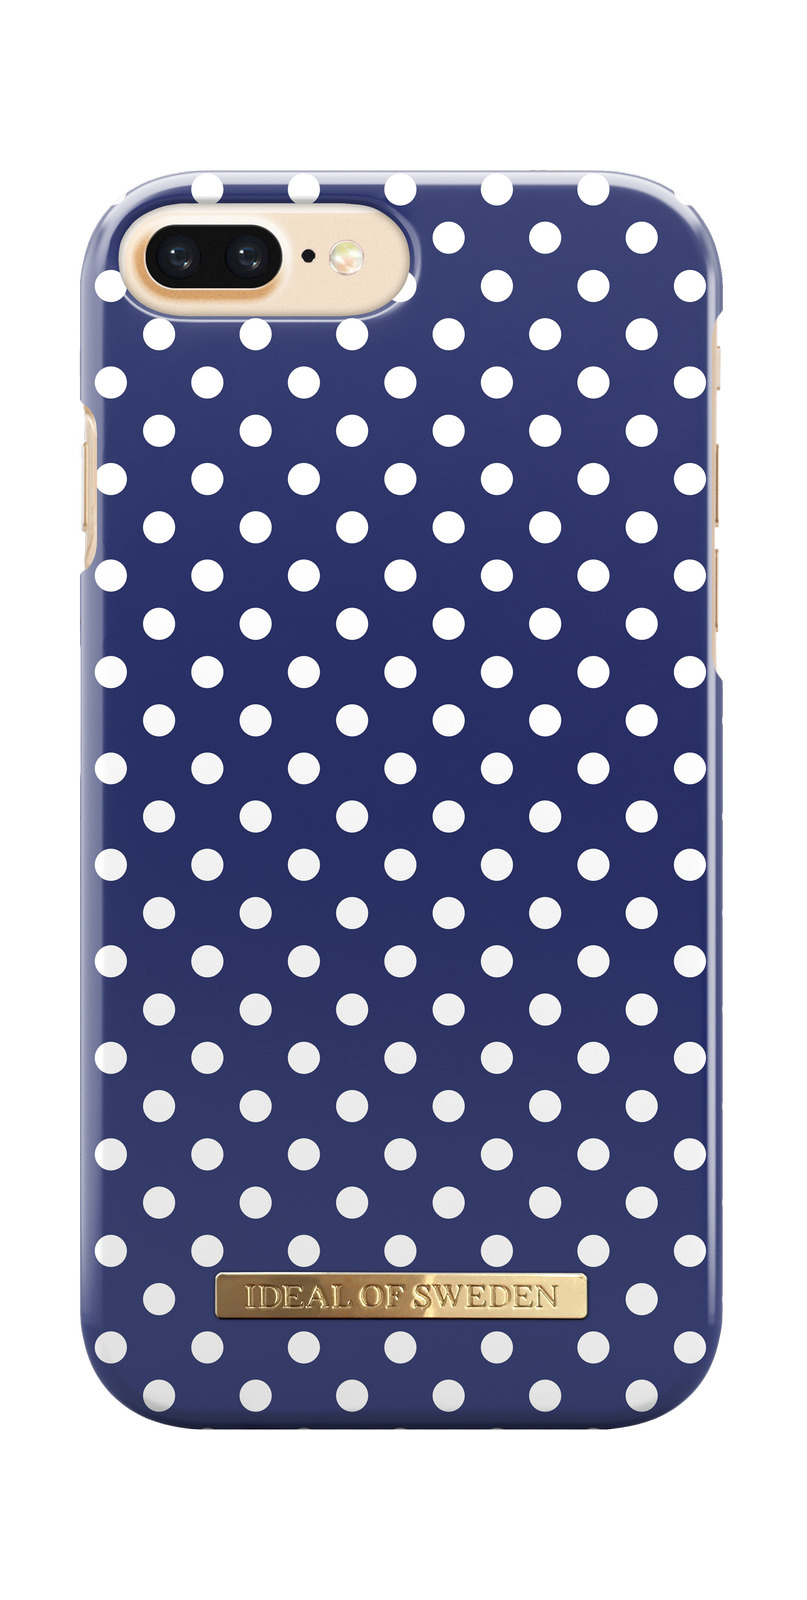 IDEAL OF Plus, iPhone Apple, ,iPhone Plus SWEDEN Dots Plus, Backcover, Polka Fashion, 7 8 iPhone 6